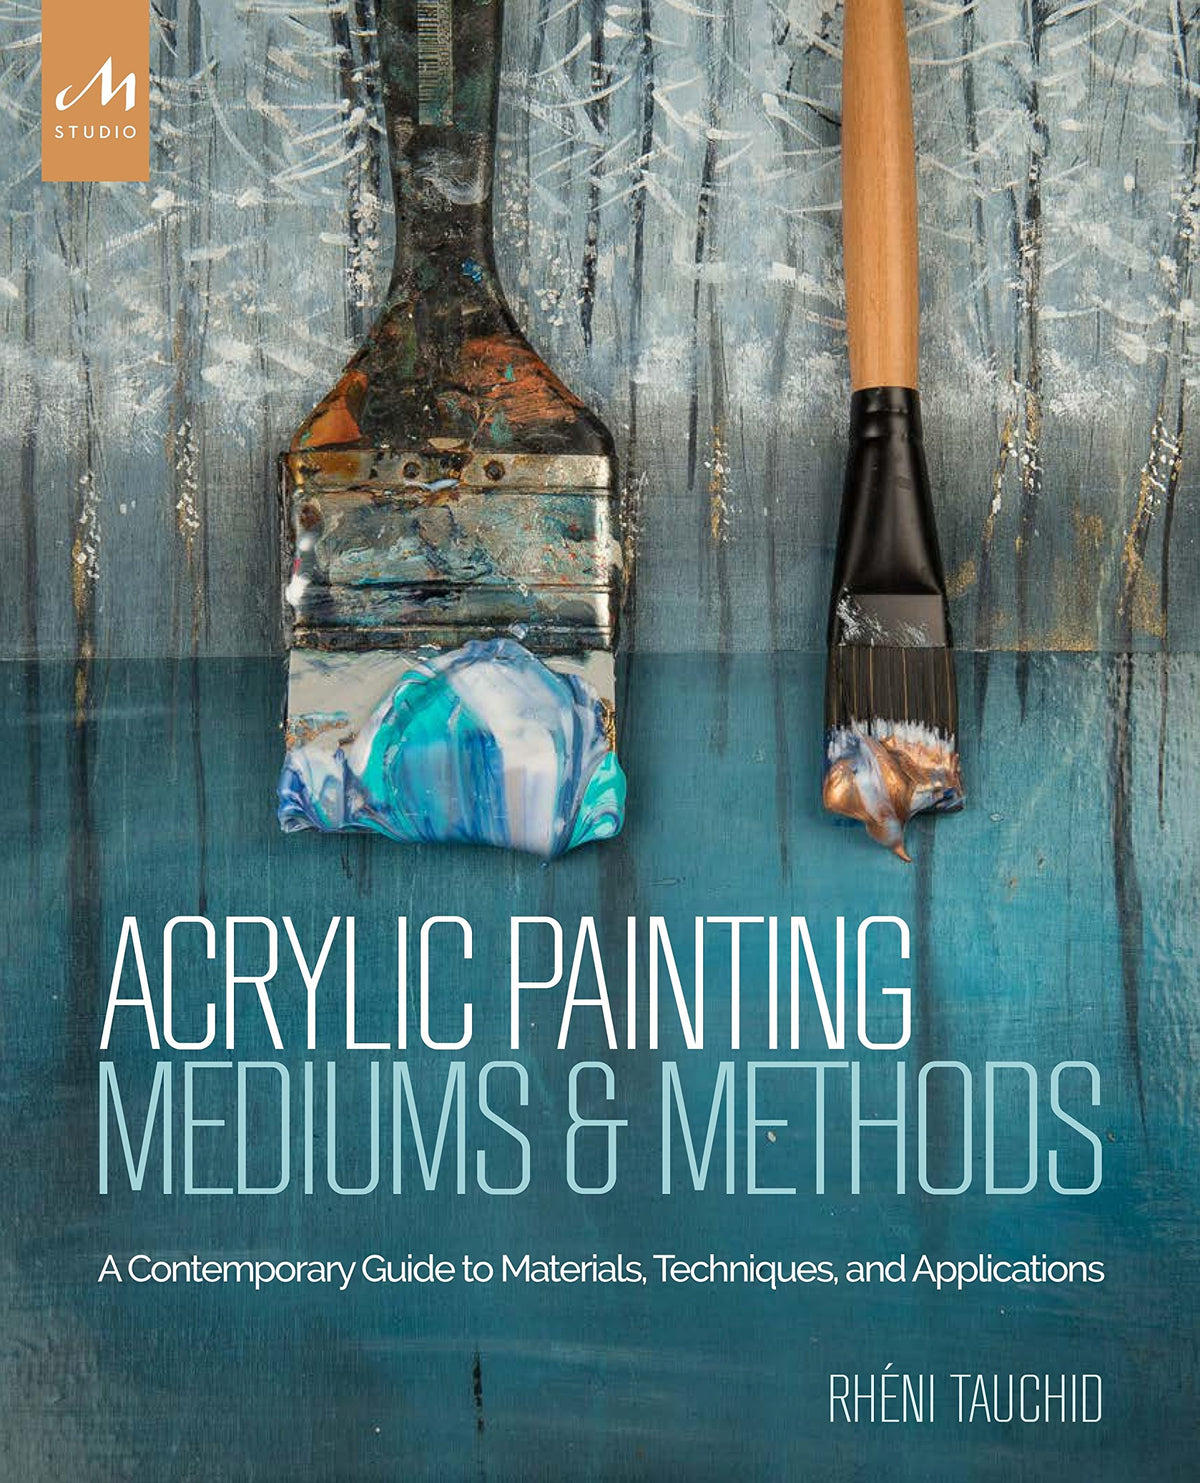 Acrylic Painting Mediums and Methods by Rheni Tauchid (4436800929879)